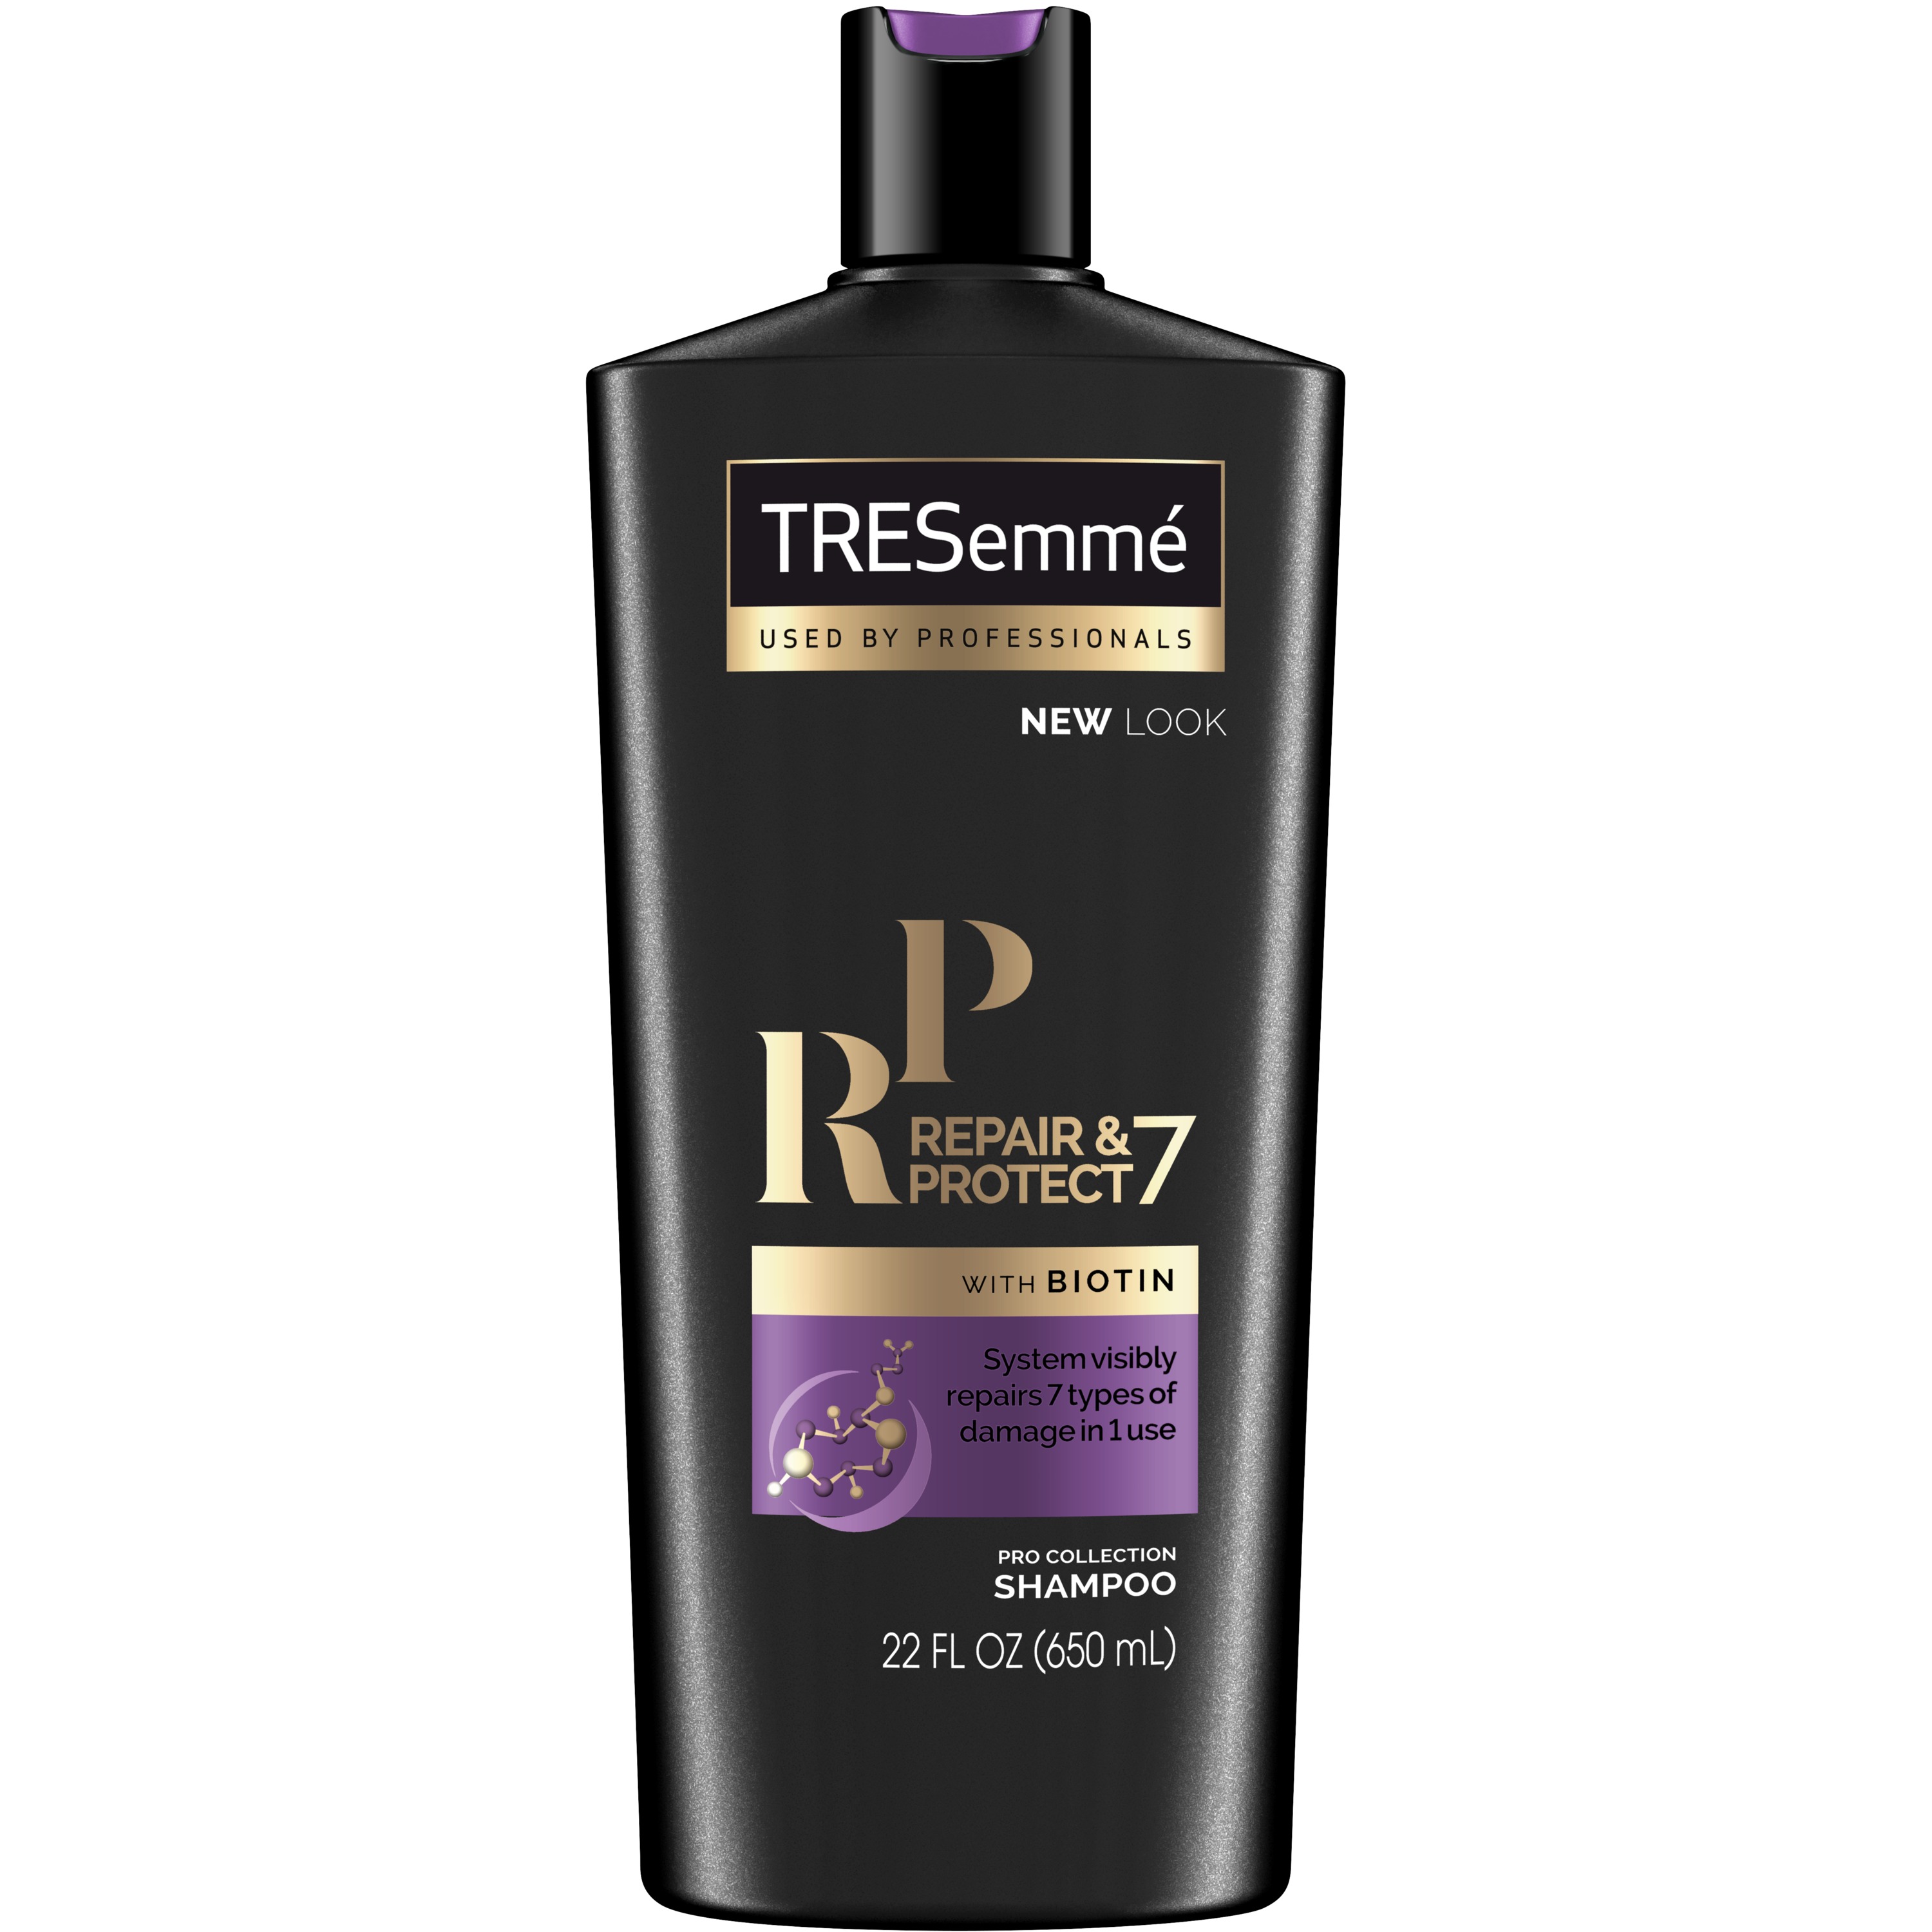 TRESemme 3-Pc Healthy & Protected Blowout Gift Set Repair and Protect with Hair Dryer (Shampoo, Conditioner) ($24.84 Value) - image 11 of 11